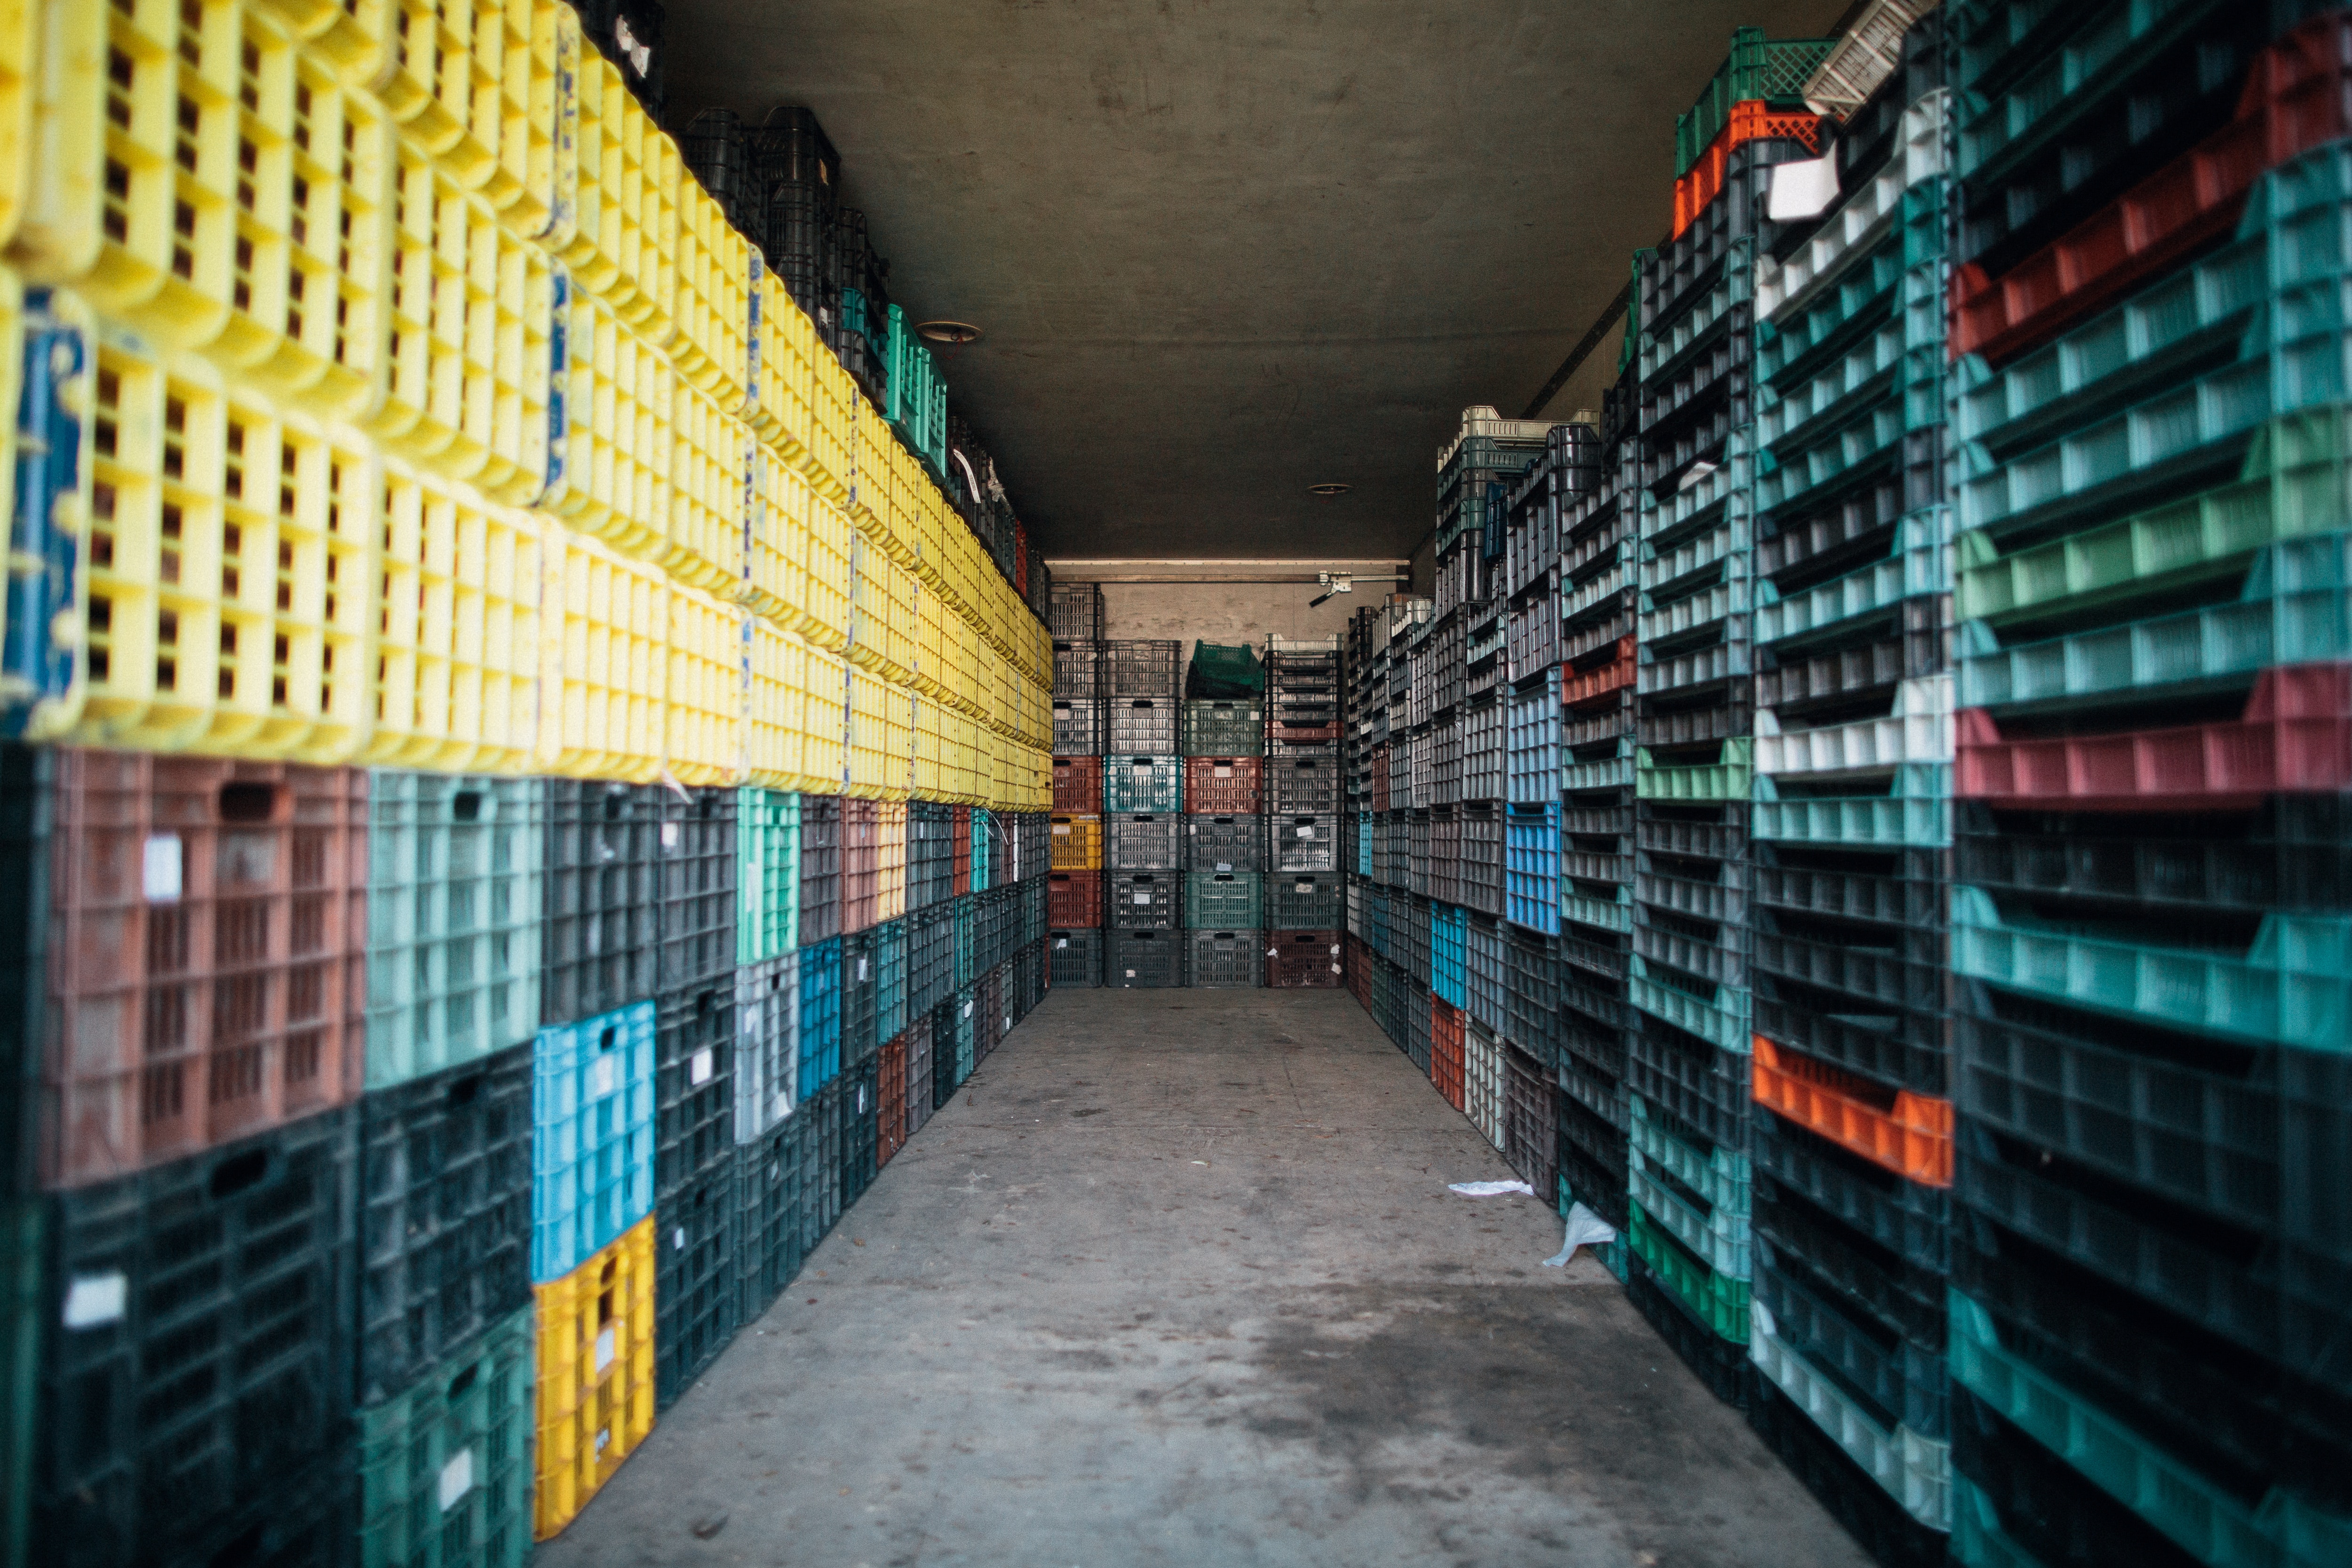 Photo by Bence Szemerey (https://www.pexels.com/photo/corridor-between-piles-of-containers-in-storehouse-7513430/)